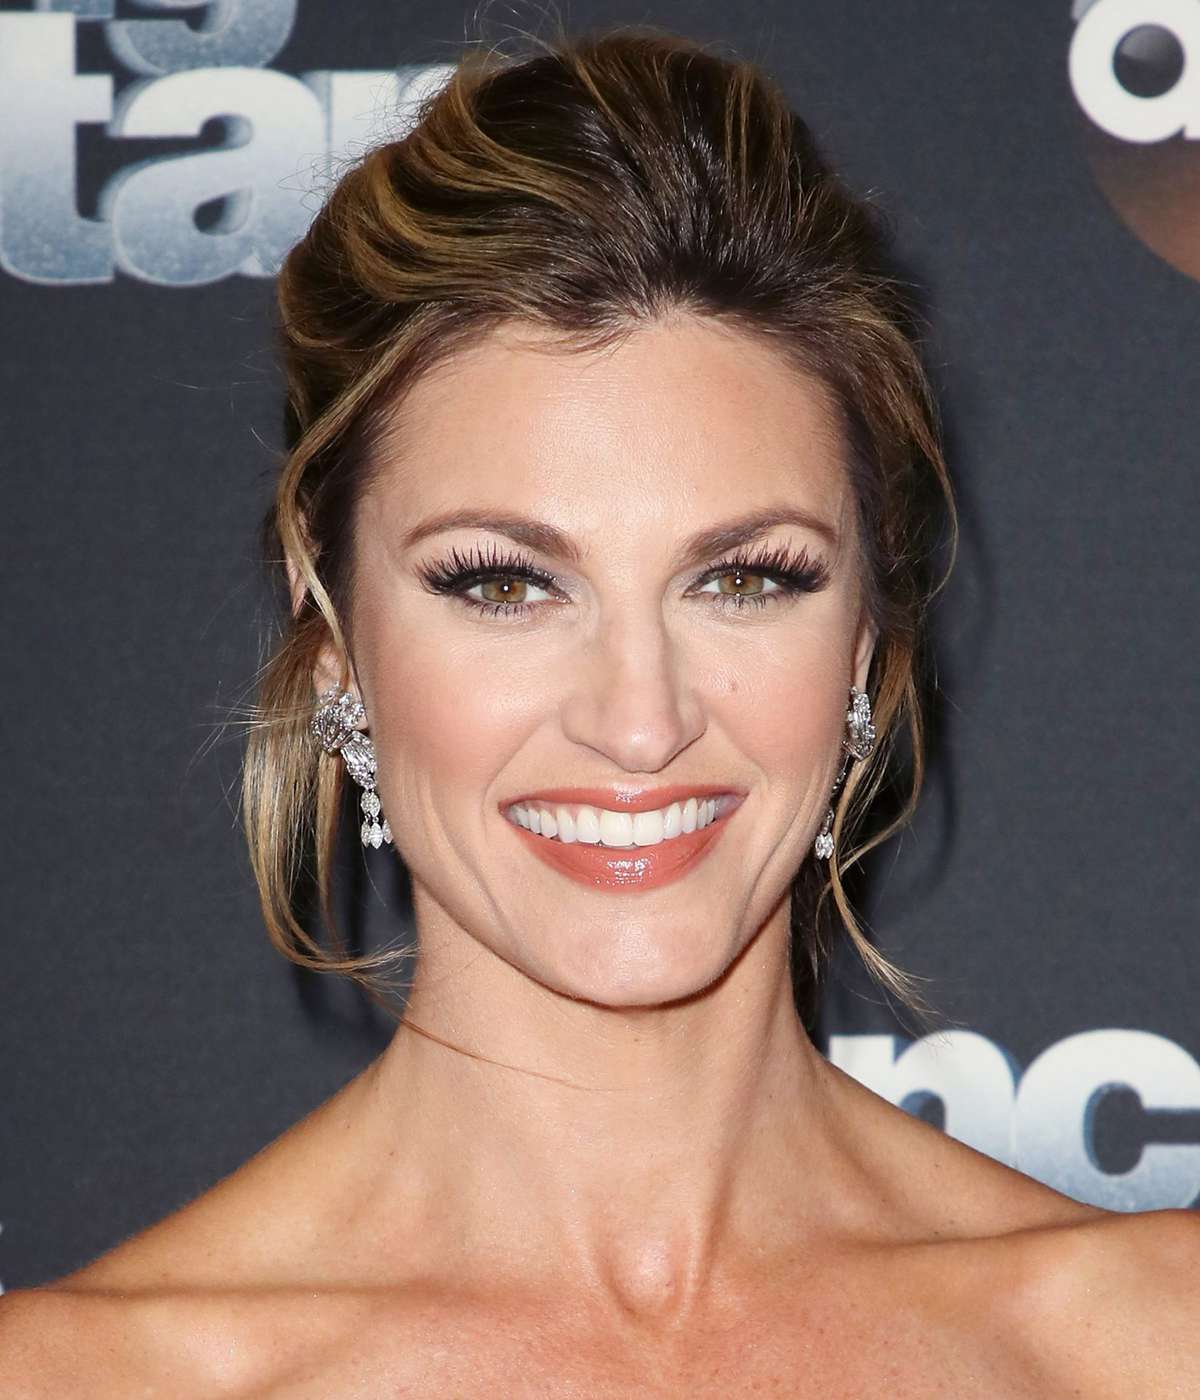 Erin Andrews - DWTS EMBED